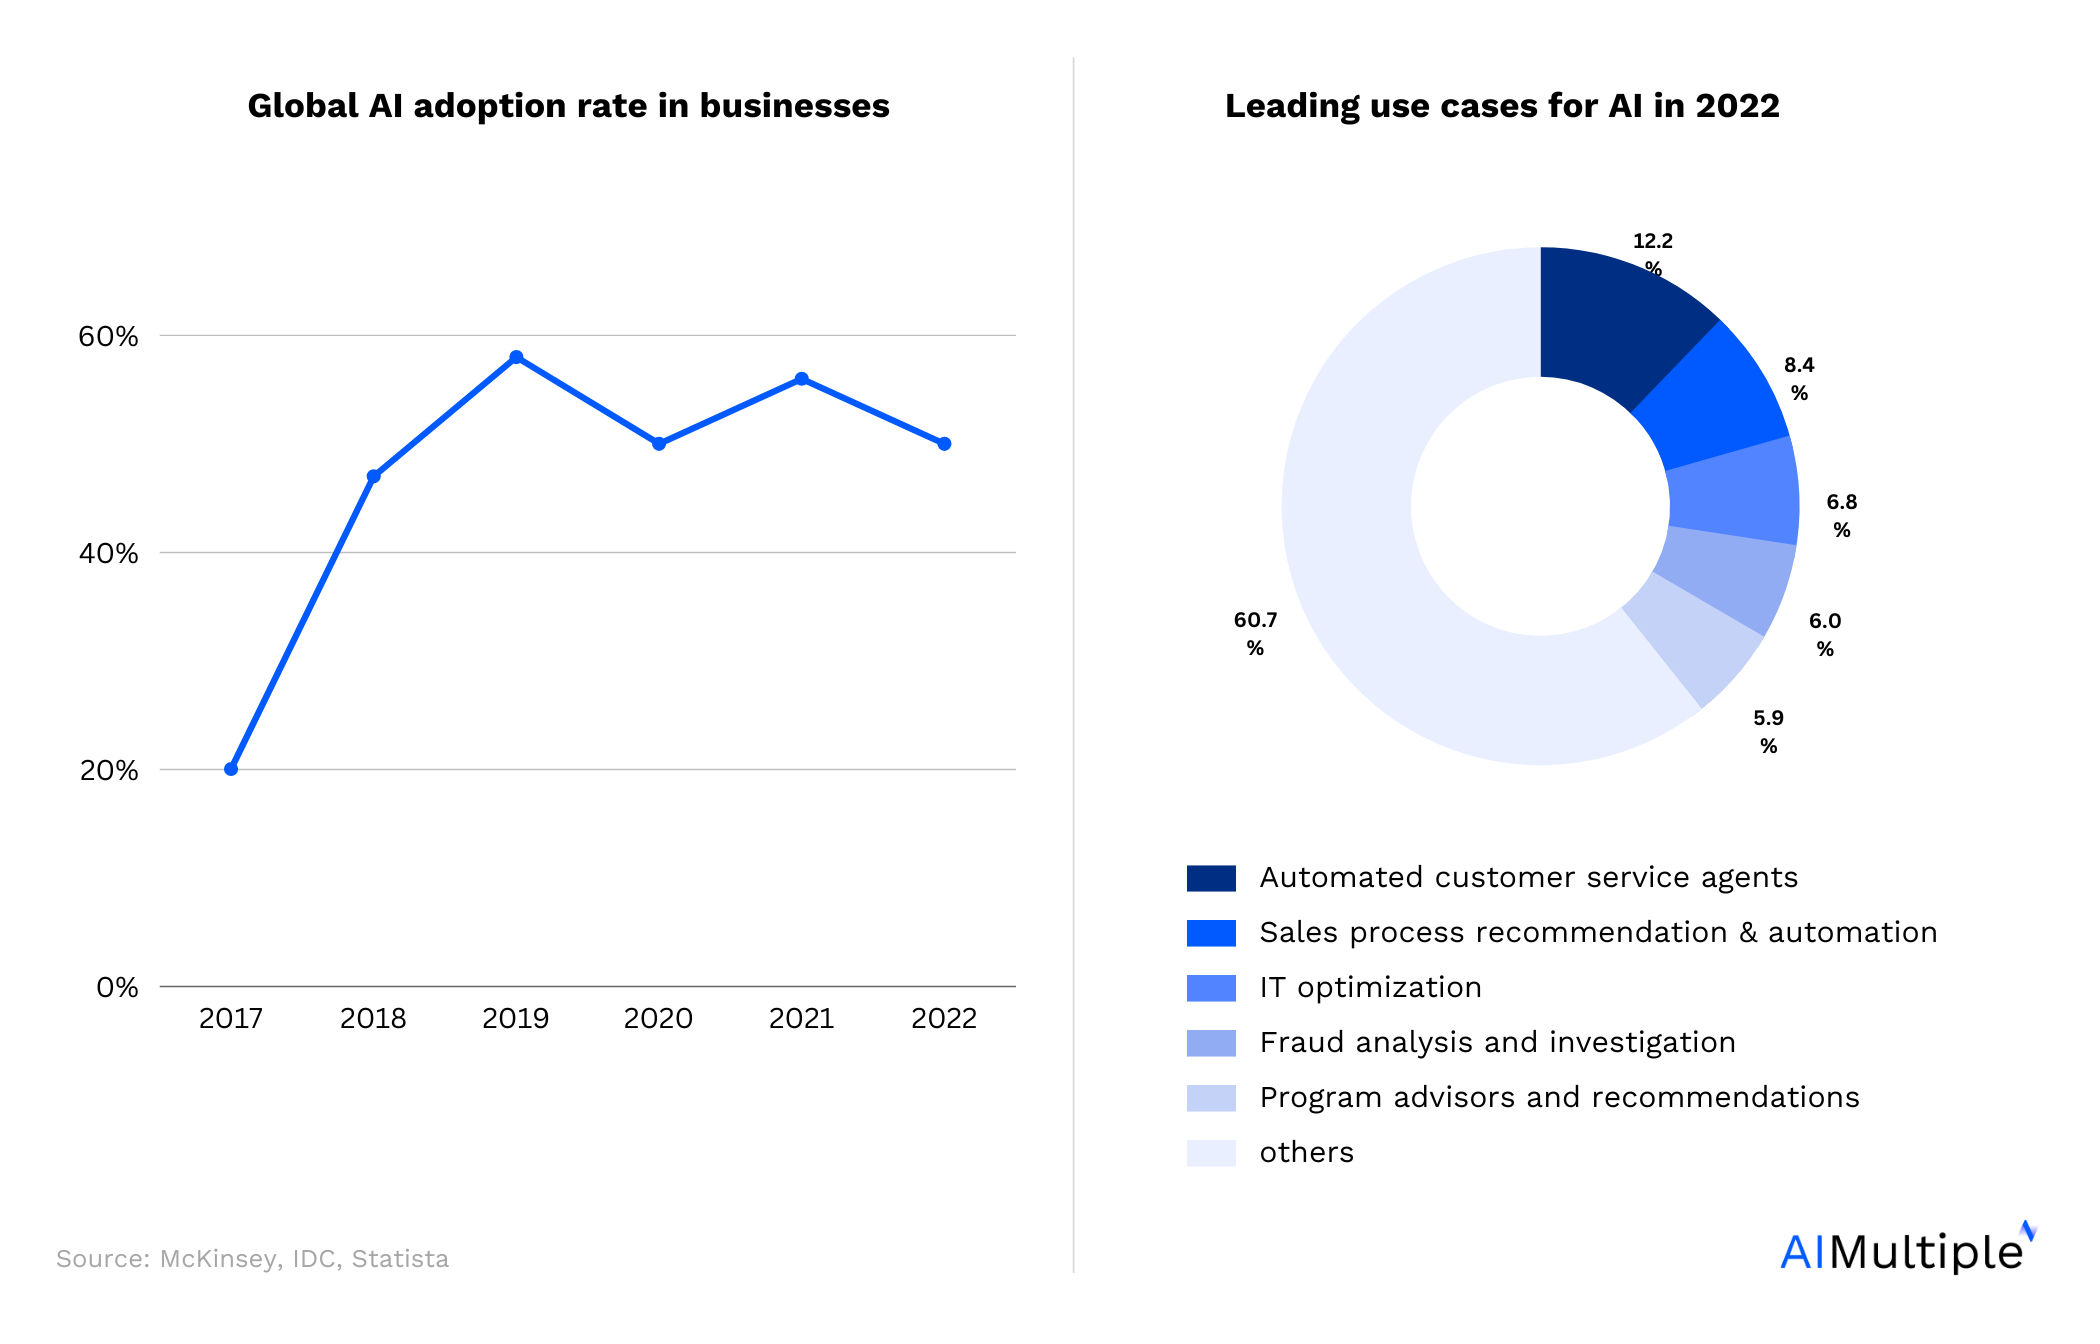 AI adoption report indicating that data collection challenges, among others, have resulted in AI doption decline in 2022